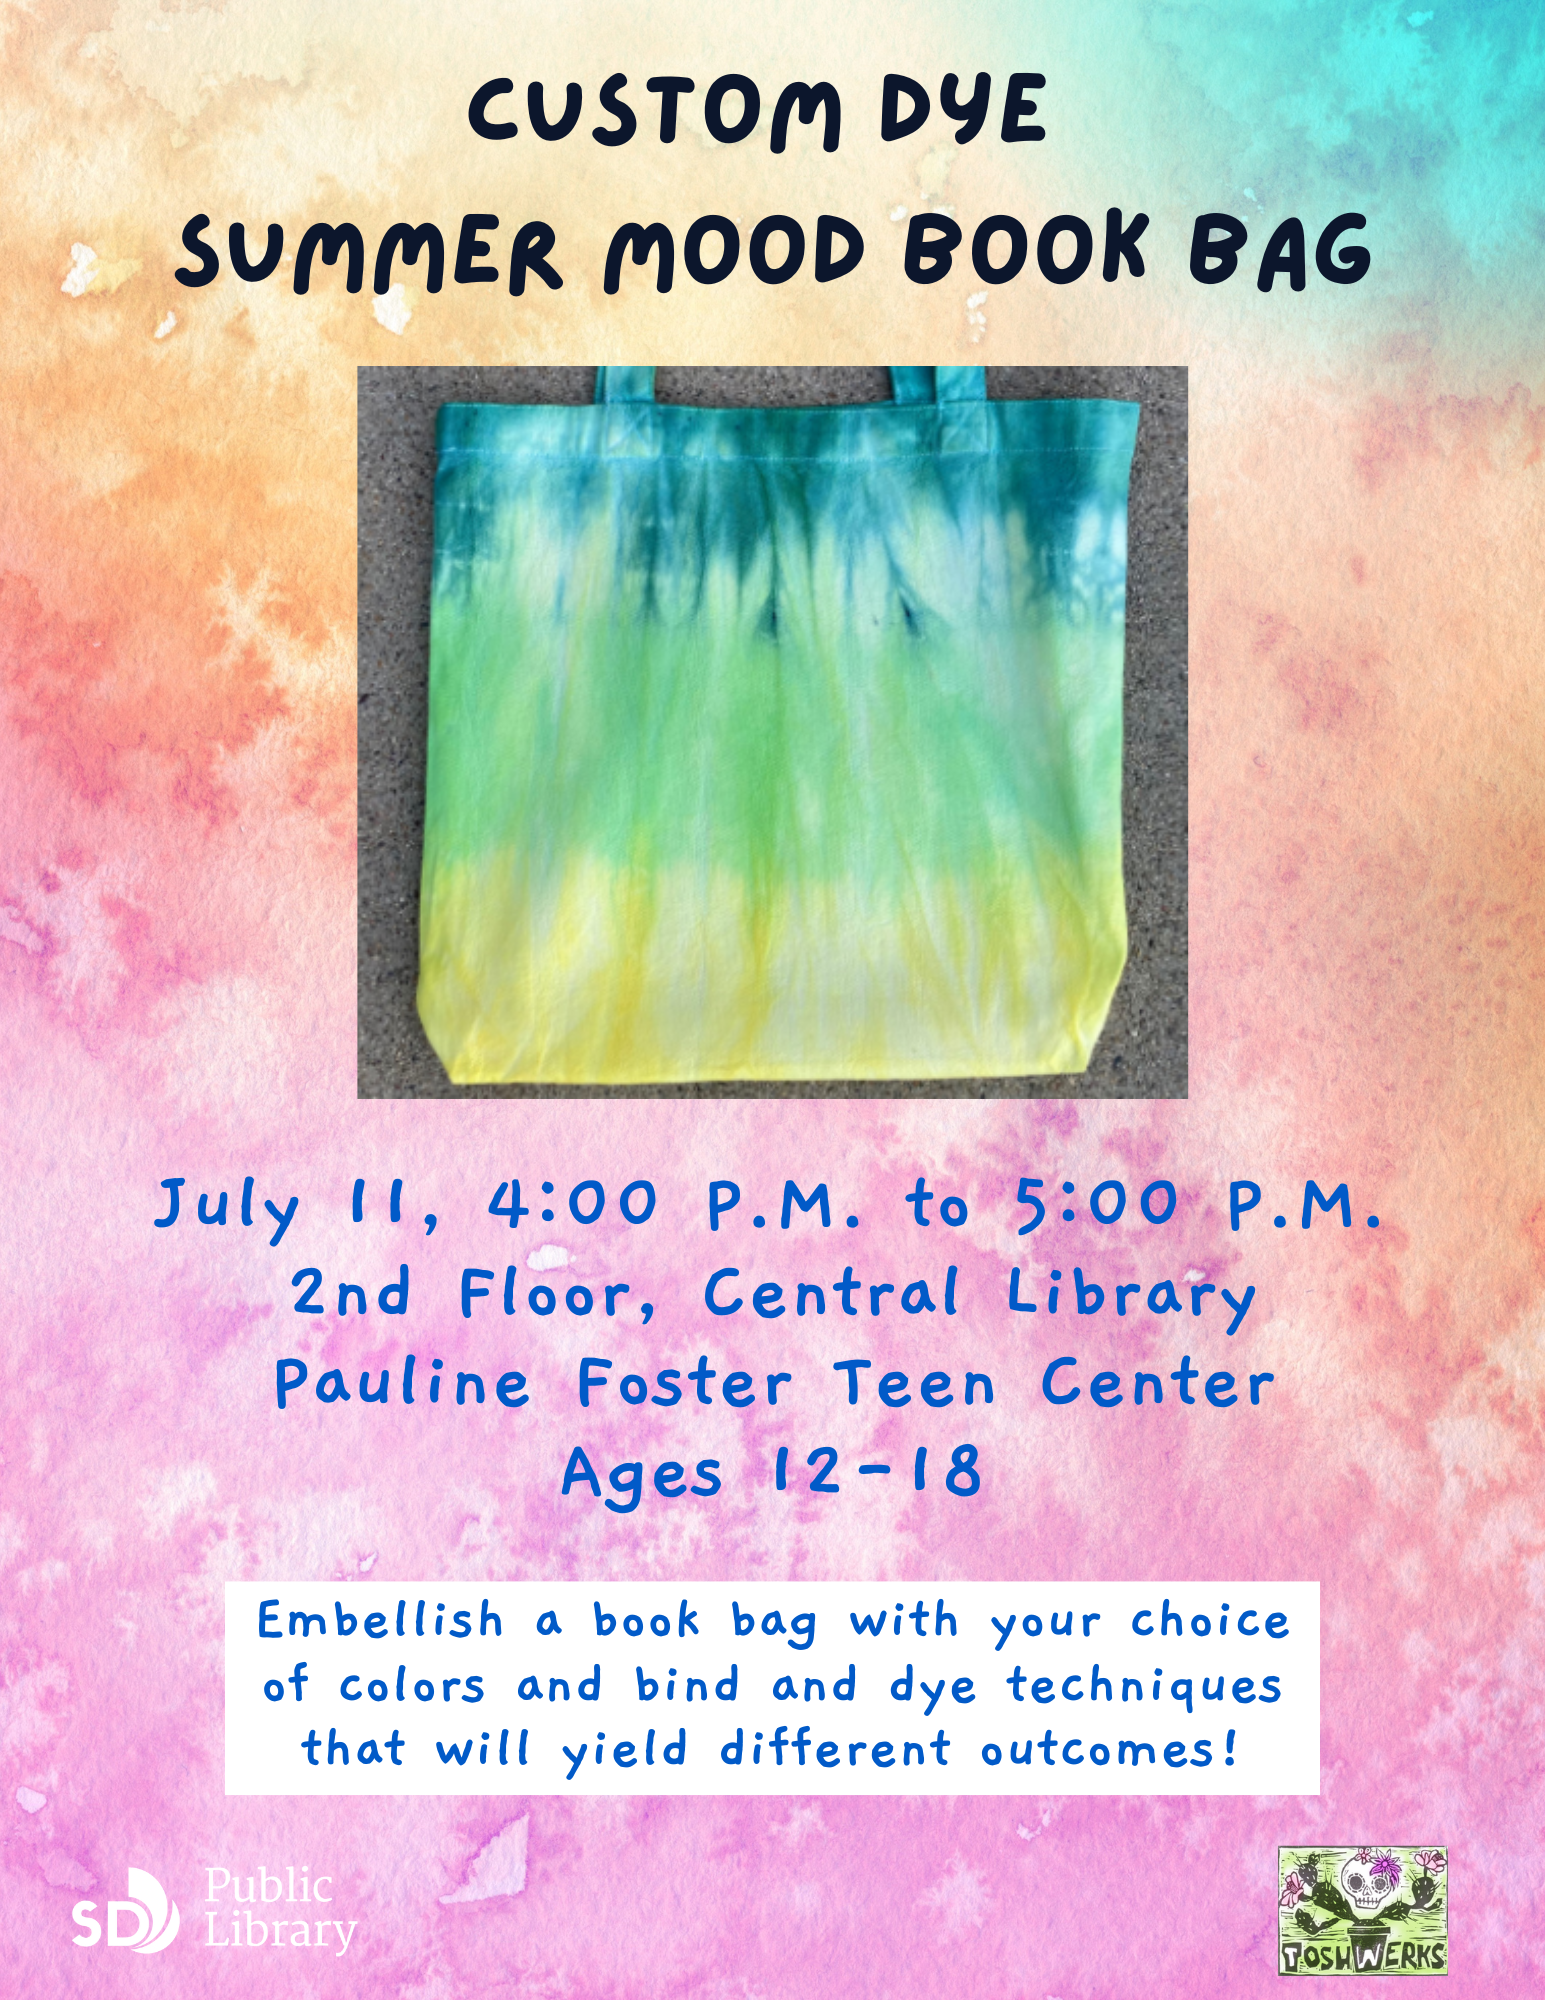 Custom Dye Summer Mood Book Bag. July 11, 4PM to 5PM. 2nd floor, Central Library. Pauline Foster Teen Center. Ages 12-18. Embellish a book bag with your choice of colors and bind and dye techniques that will yield different outcomes!